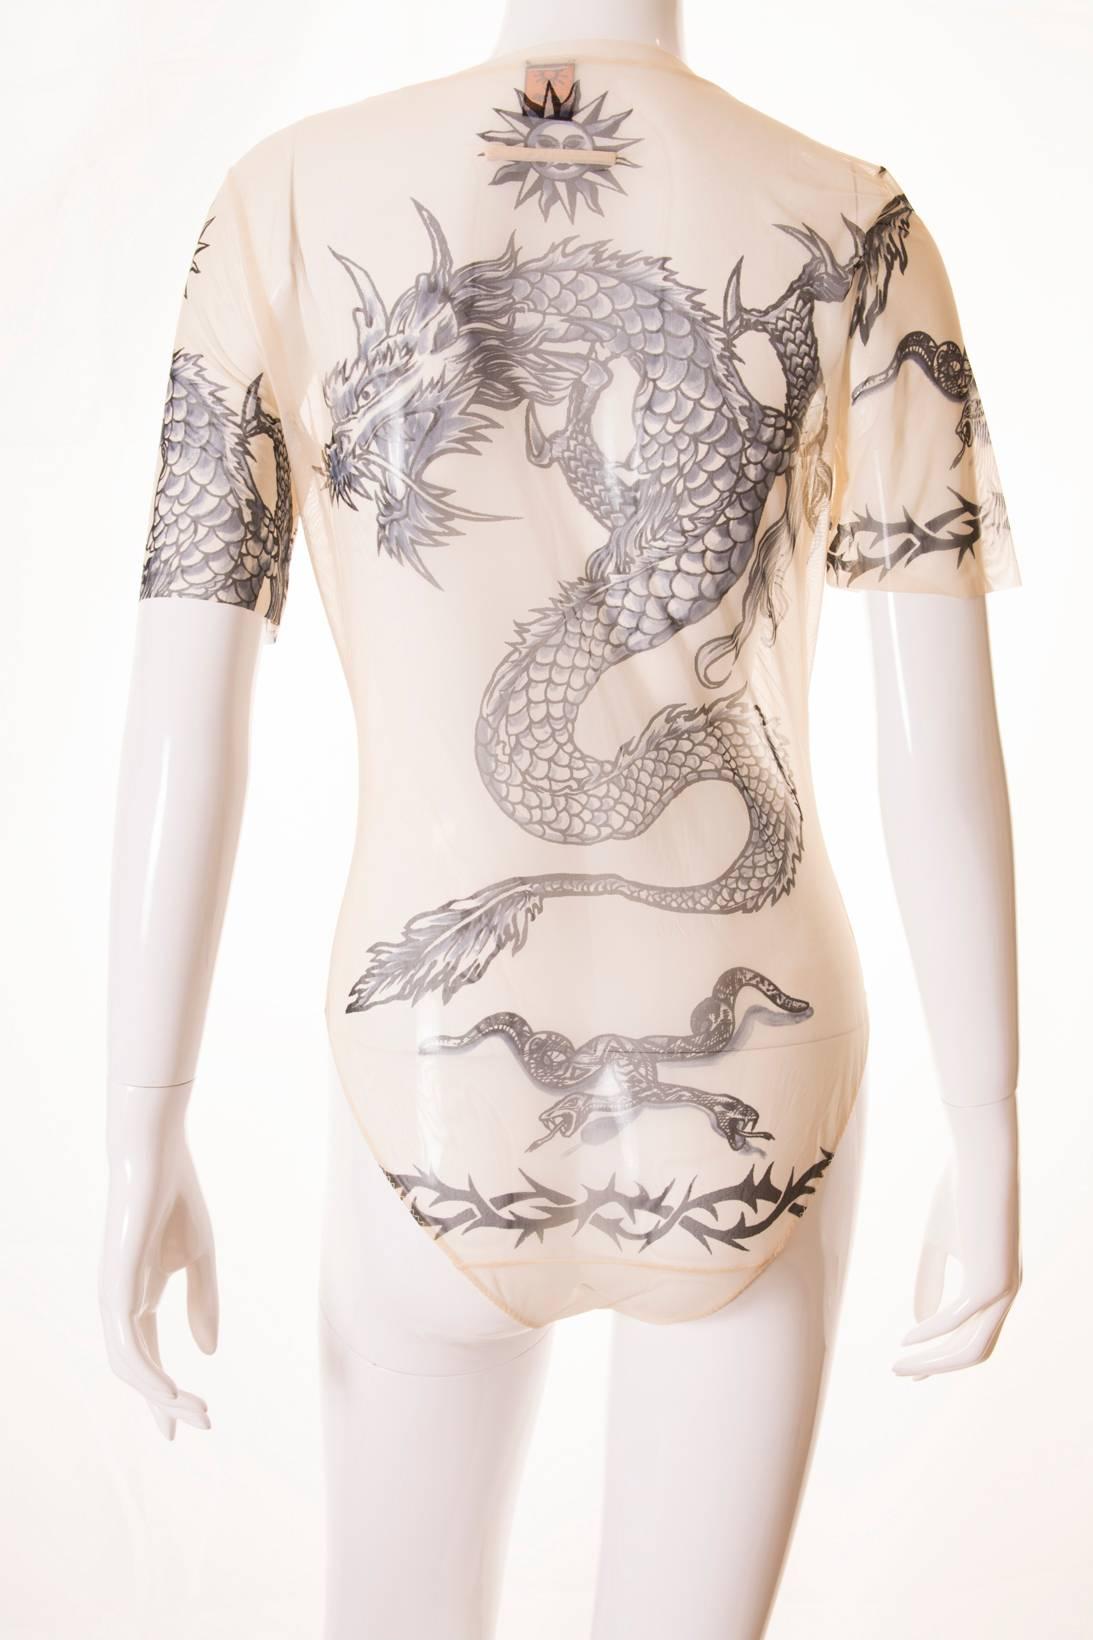 Contemporary issues. This 1994/1995 bodysuit by Jean Paul Gaultier Soleil transmits a pertinent social message; wrap it up! This bodysuit is made from sheer, skin coloured fabric so that it gives the illusion the wearer is tattooed. The tattoo